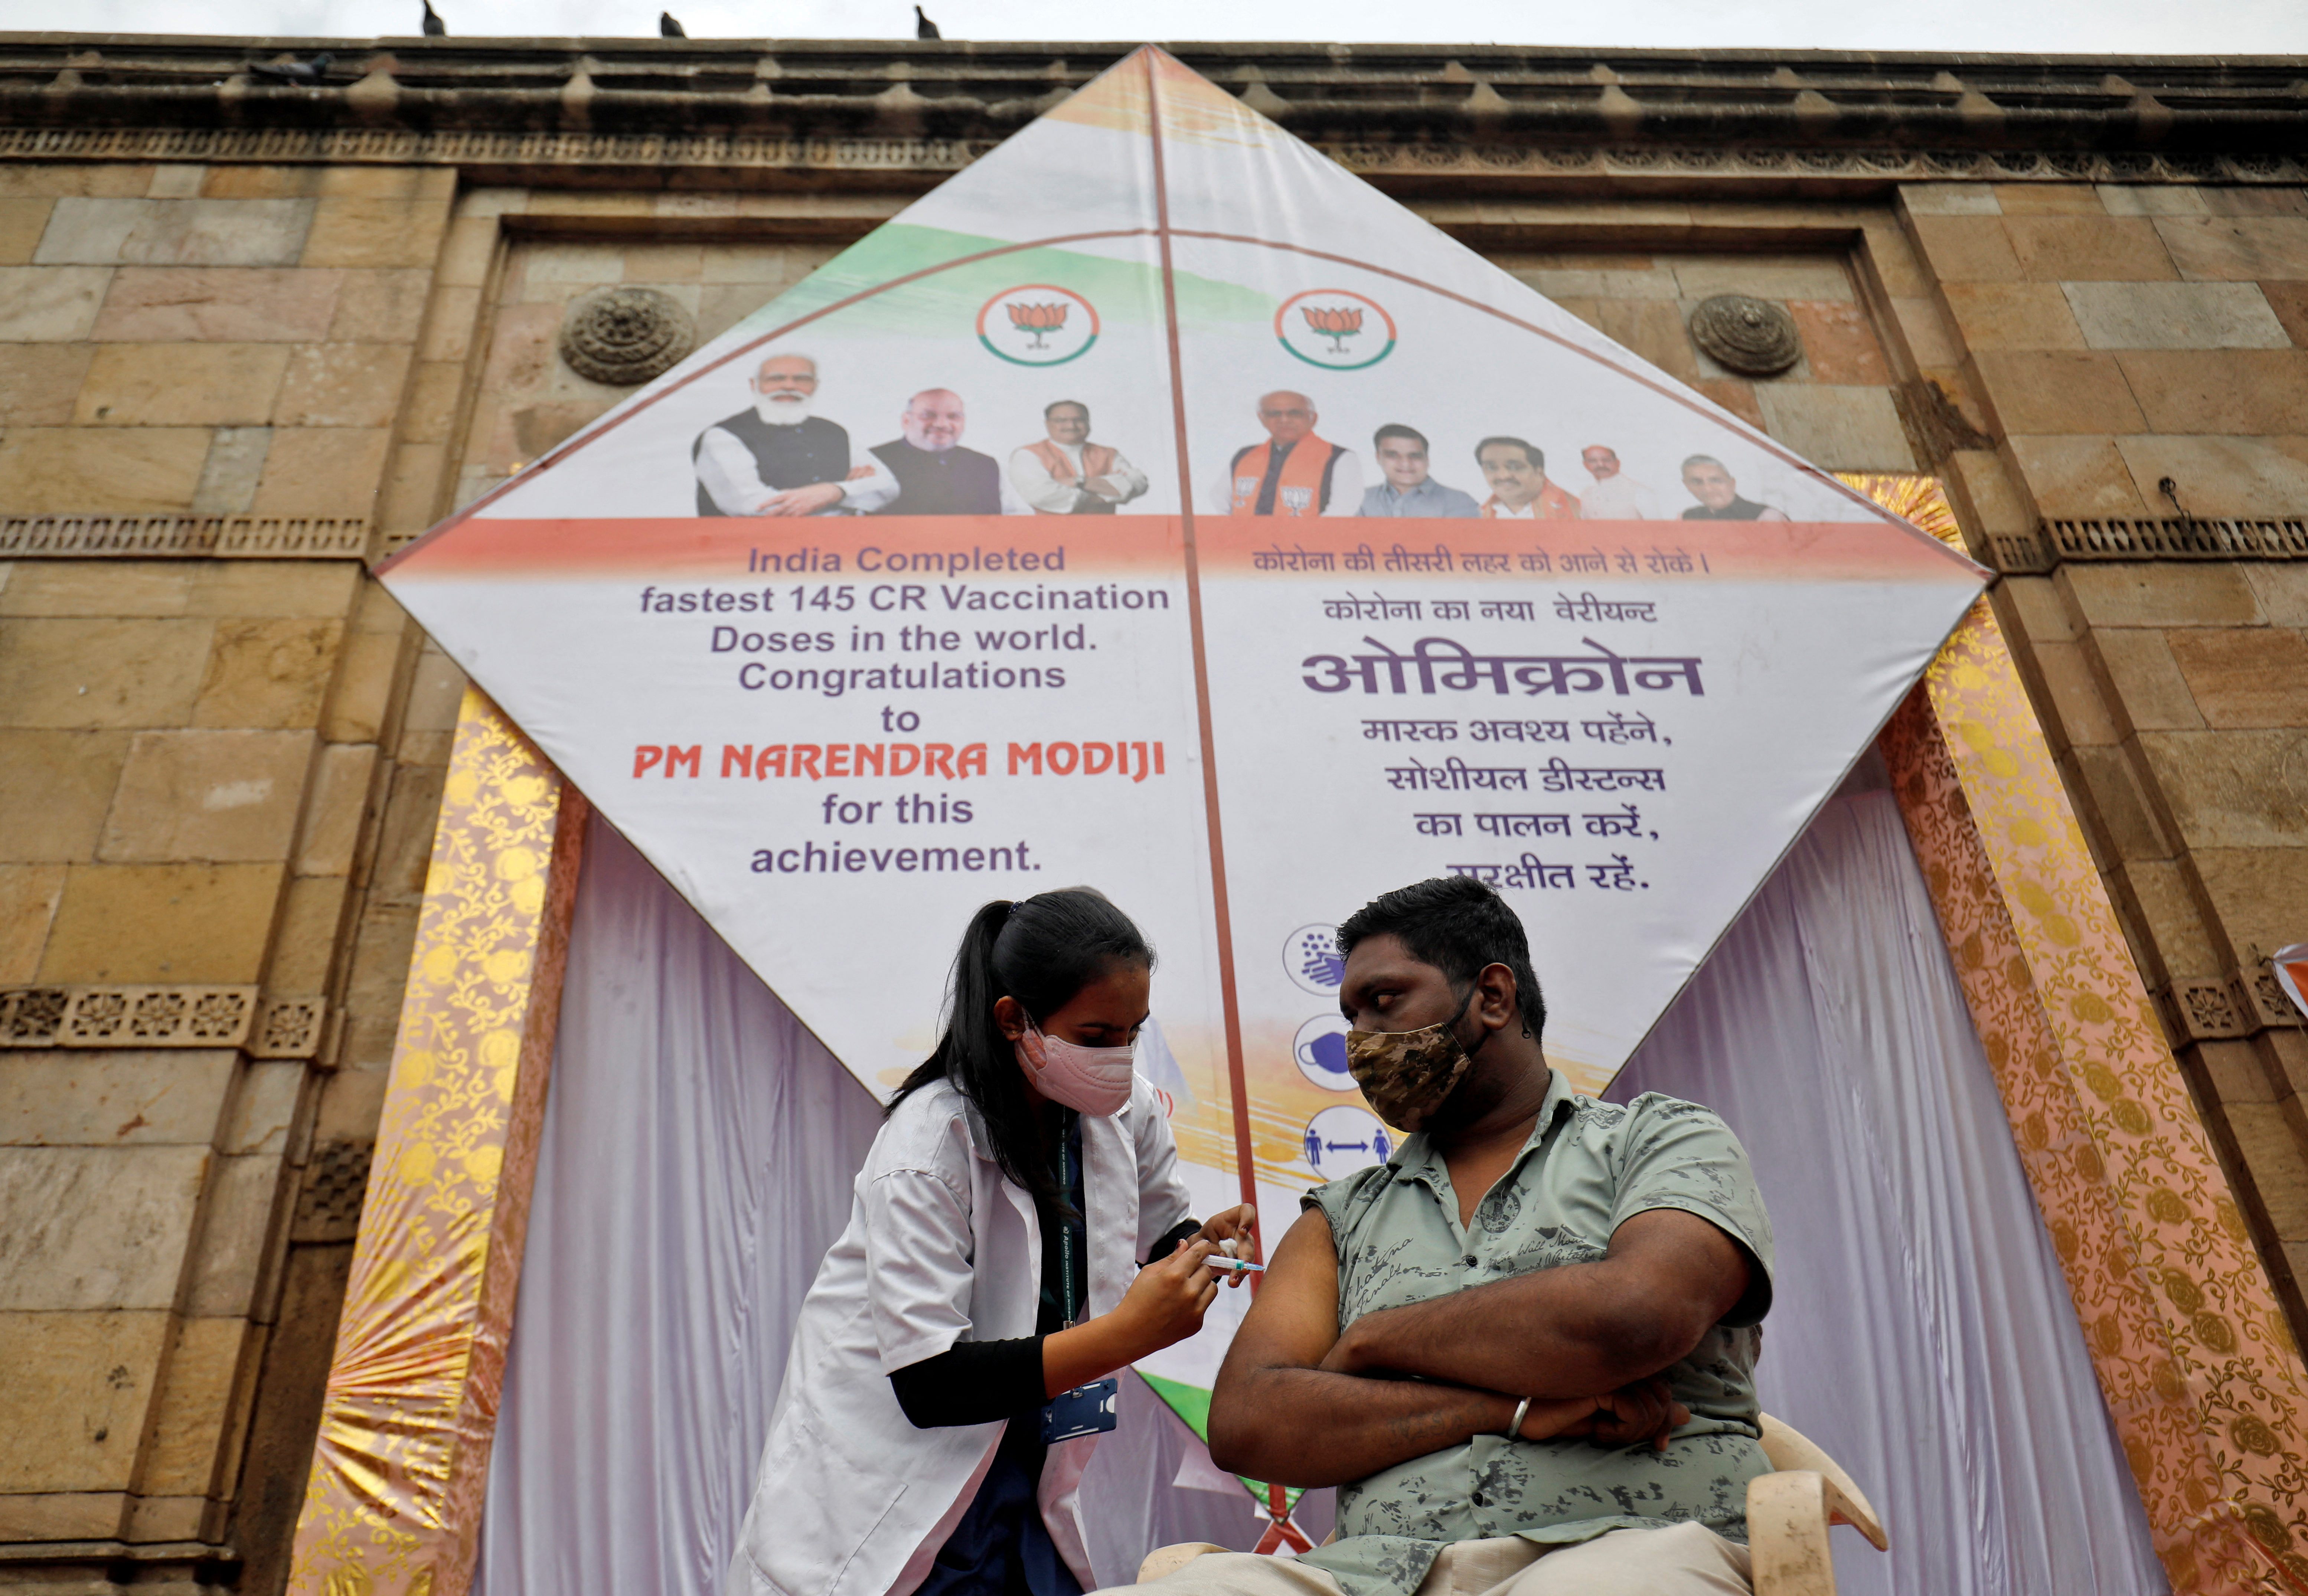 A man receives a dose of vaccine against the coronavirus disease (COVID-19) in front of a giant kite in Ahmedabad